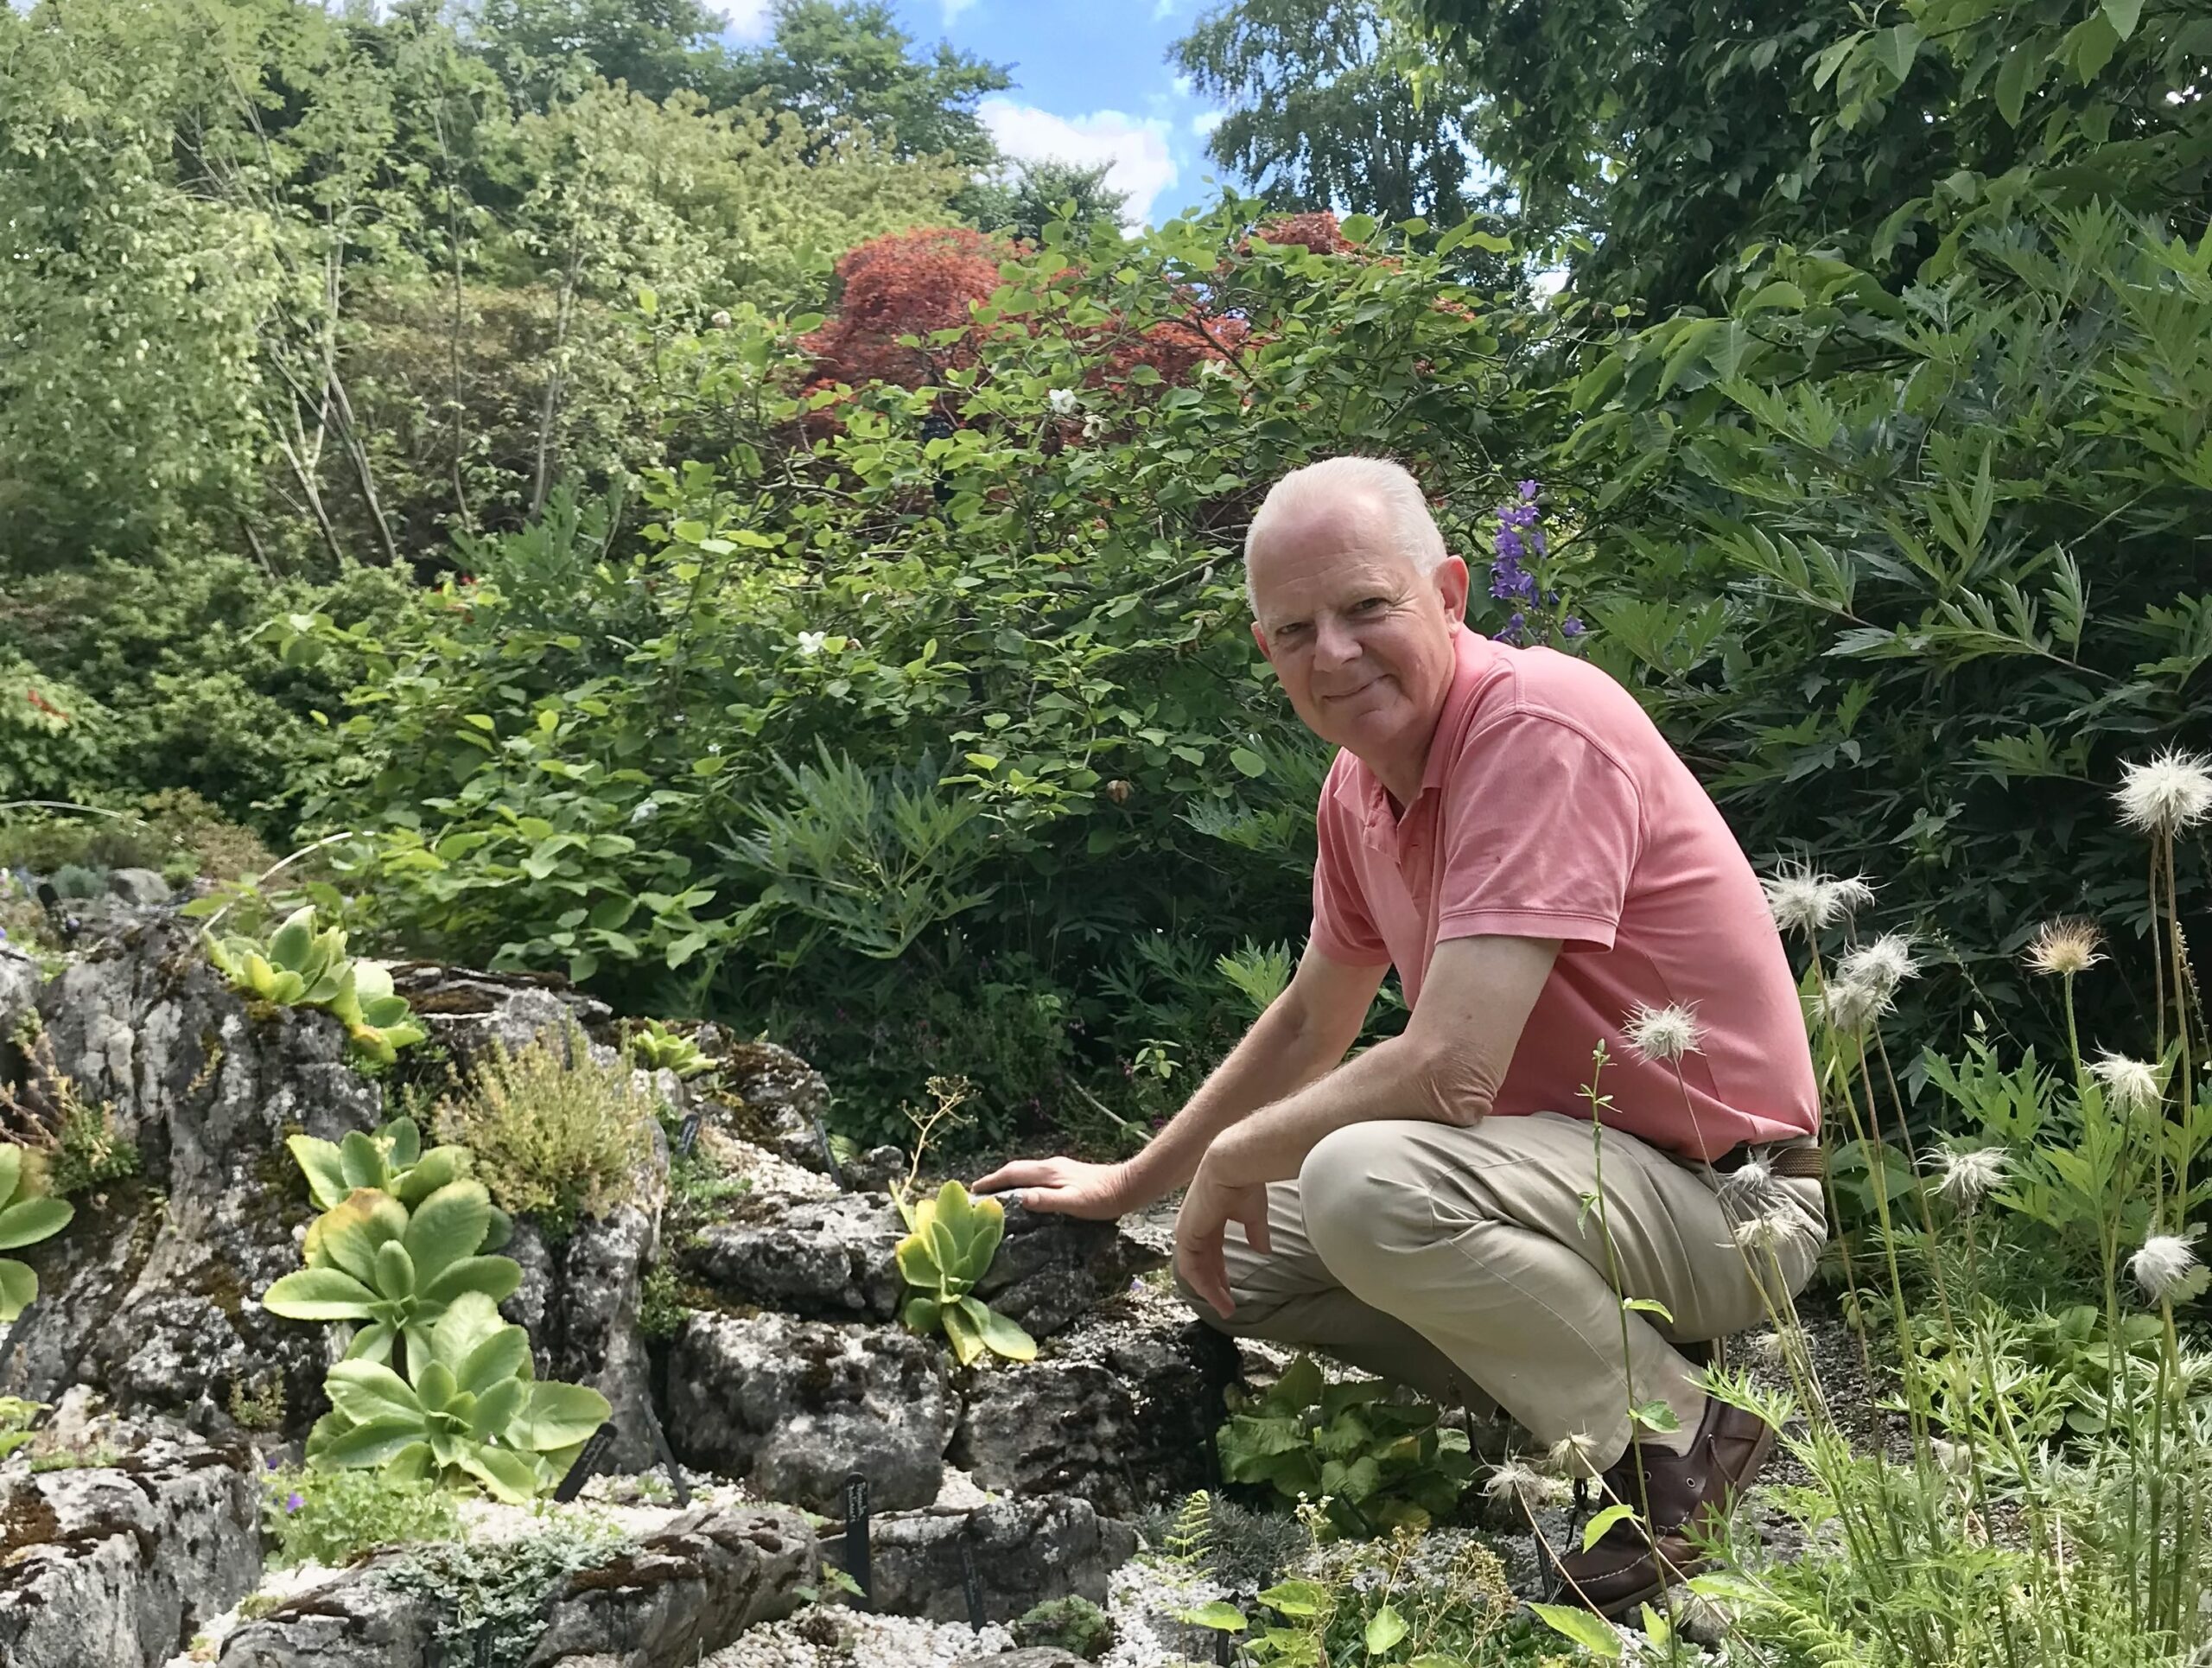 A man in khaki trousers and a pink shirt crouches atop limestone amid a rock garden, surrounded by greenery and plants.